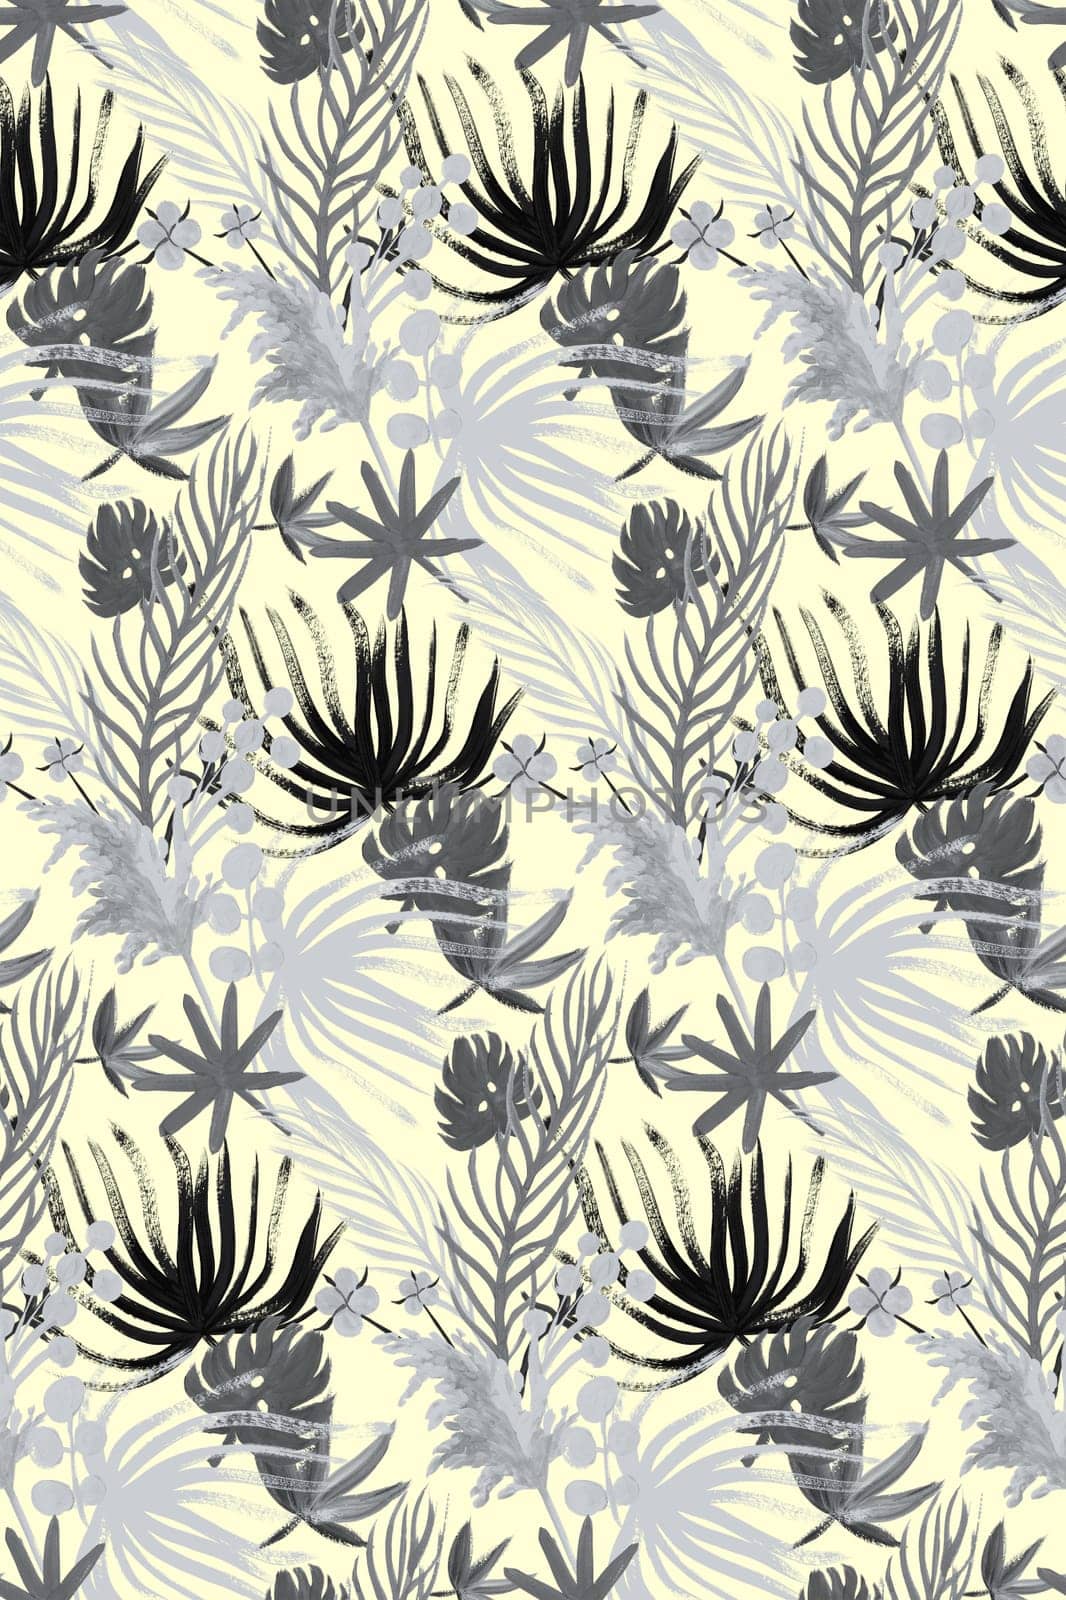 Monochrome textile seamless pattern with tropical dried flowers in black and white by MarinaVoyush